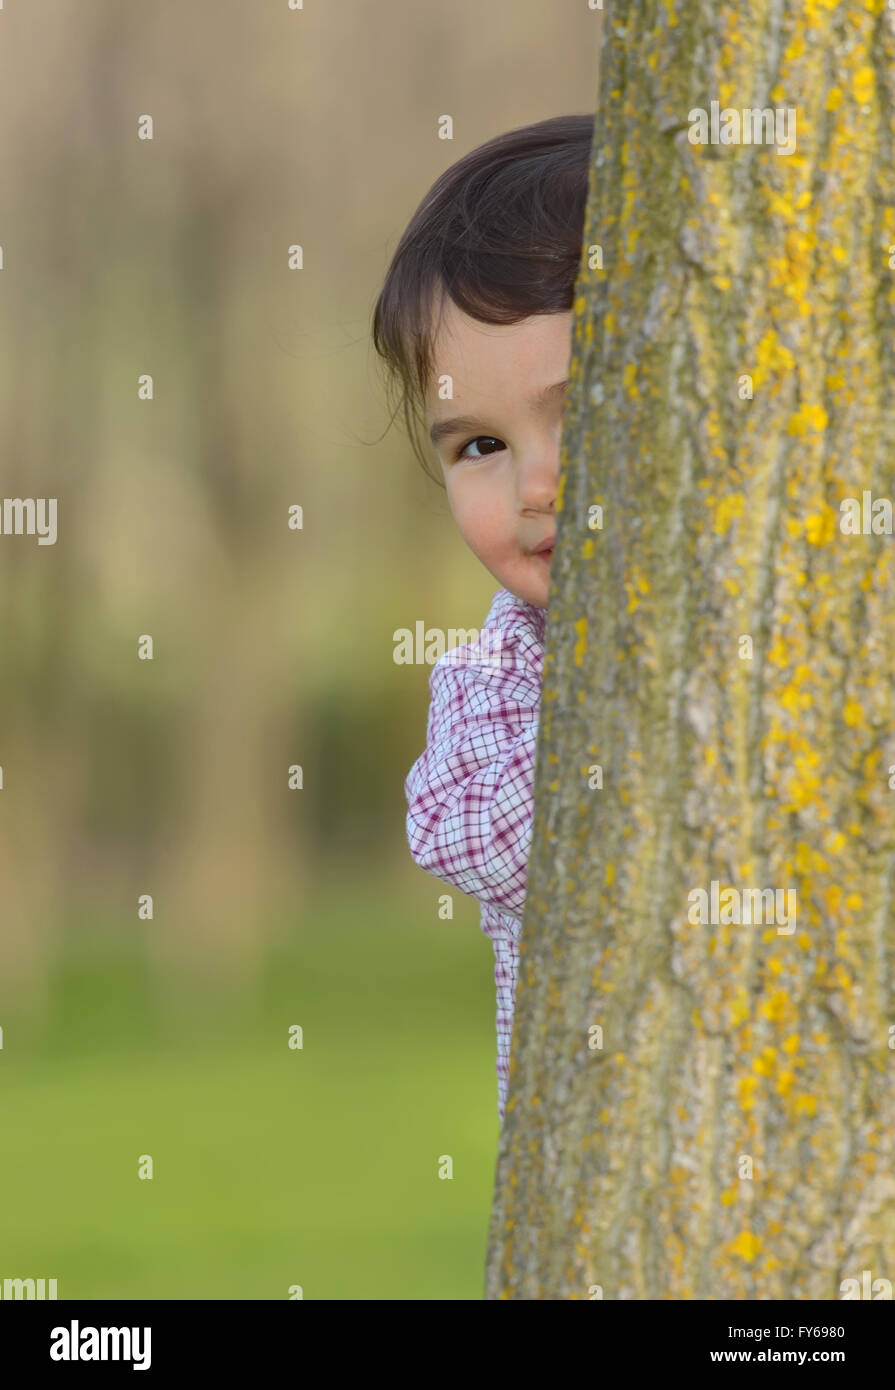 Portrait of a little girl hiding behind a tree Stock Photo